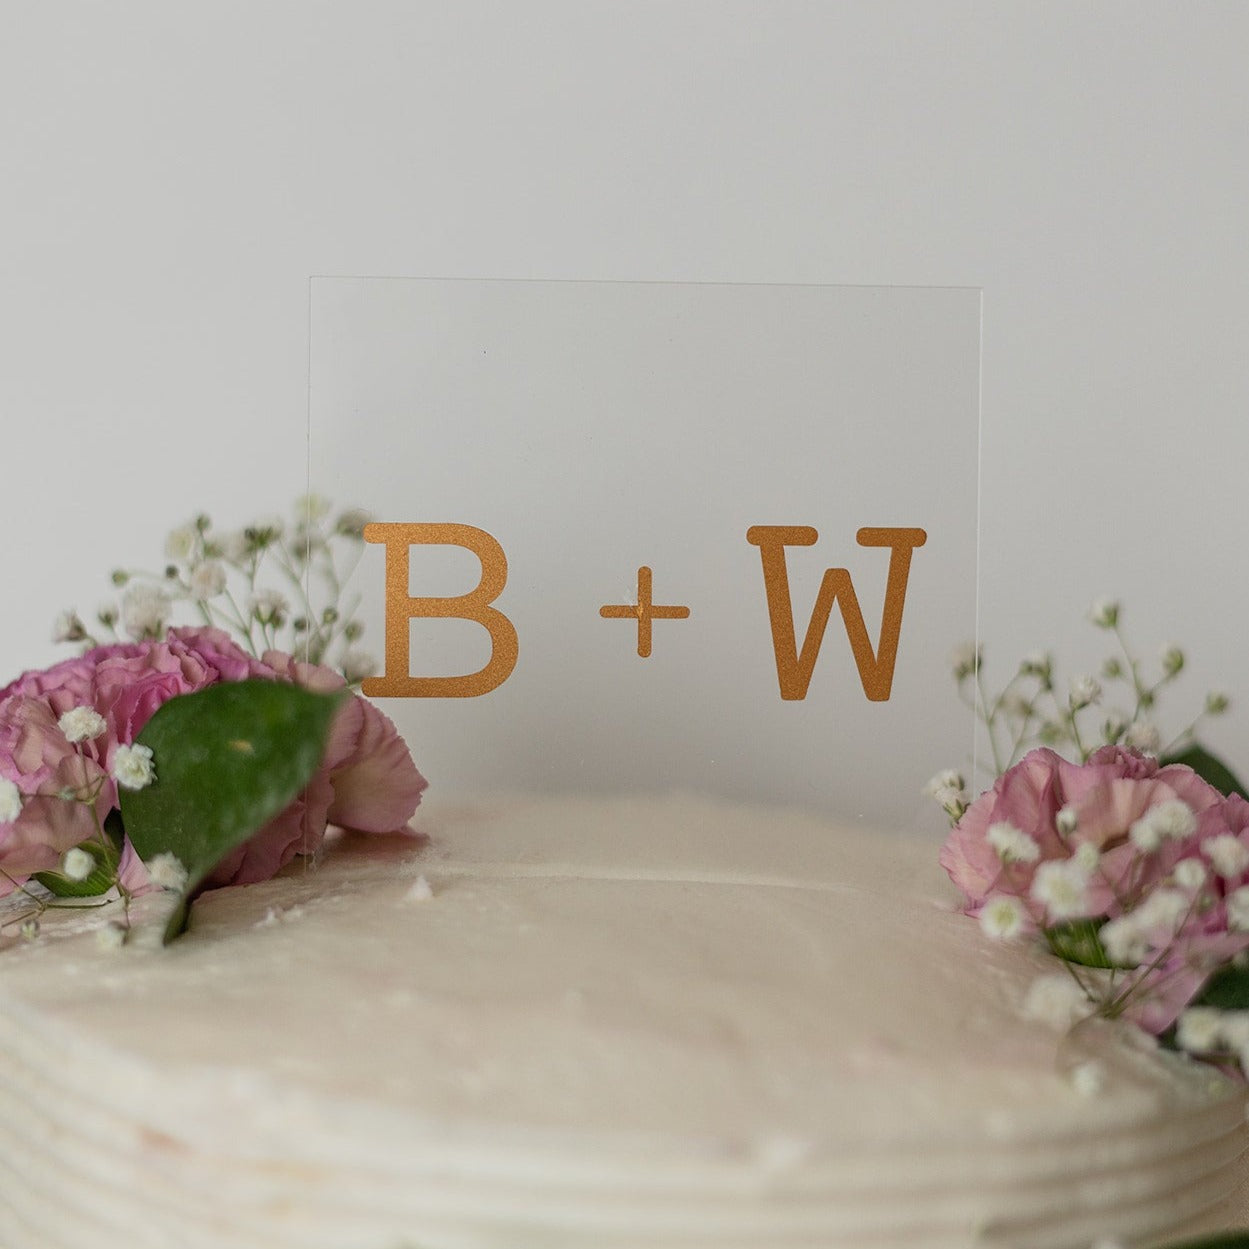 A clear, square shaped cake topper sits on top of a white cake with pink flowers, sprigs of baby's breath and dark green leaves. The cake topper reads "B + W"